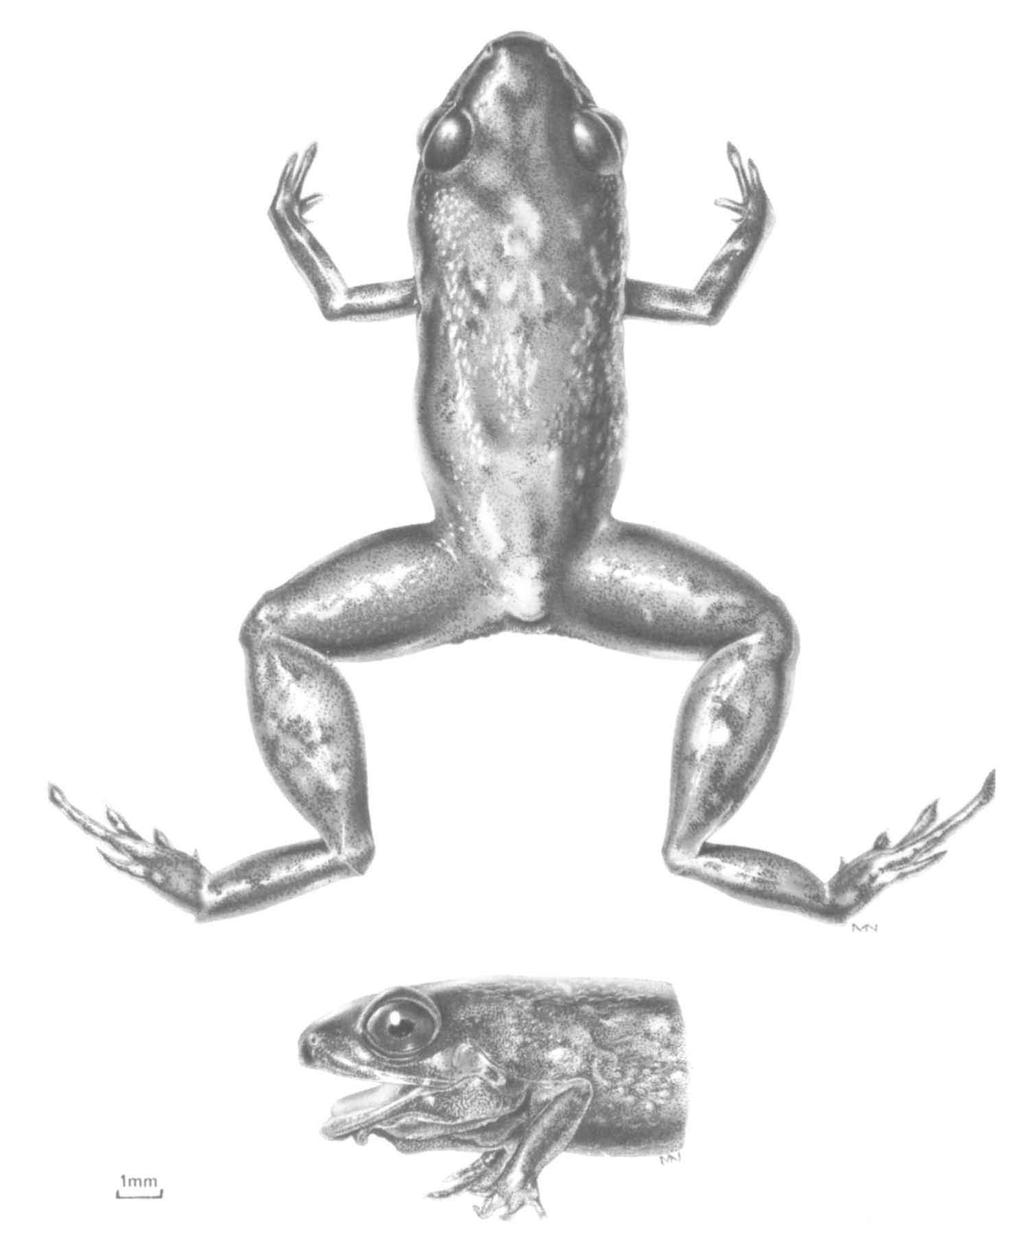 HOOGMOED & LESCURE: SOUTH AMERICAN FROGS 97 Fig. 5.